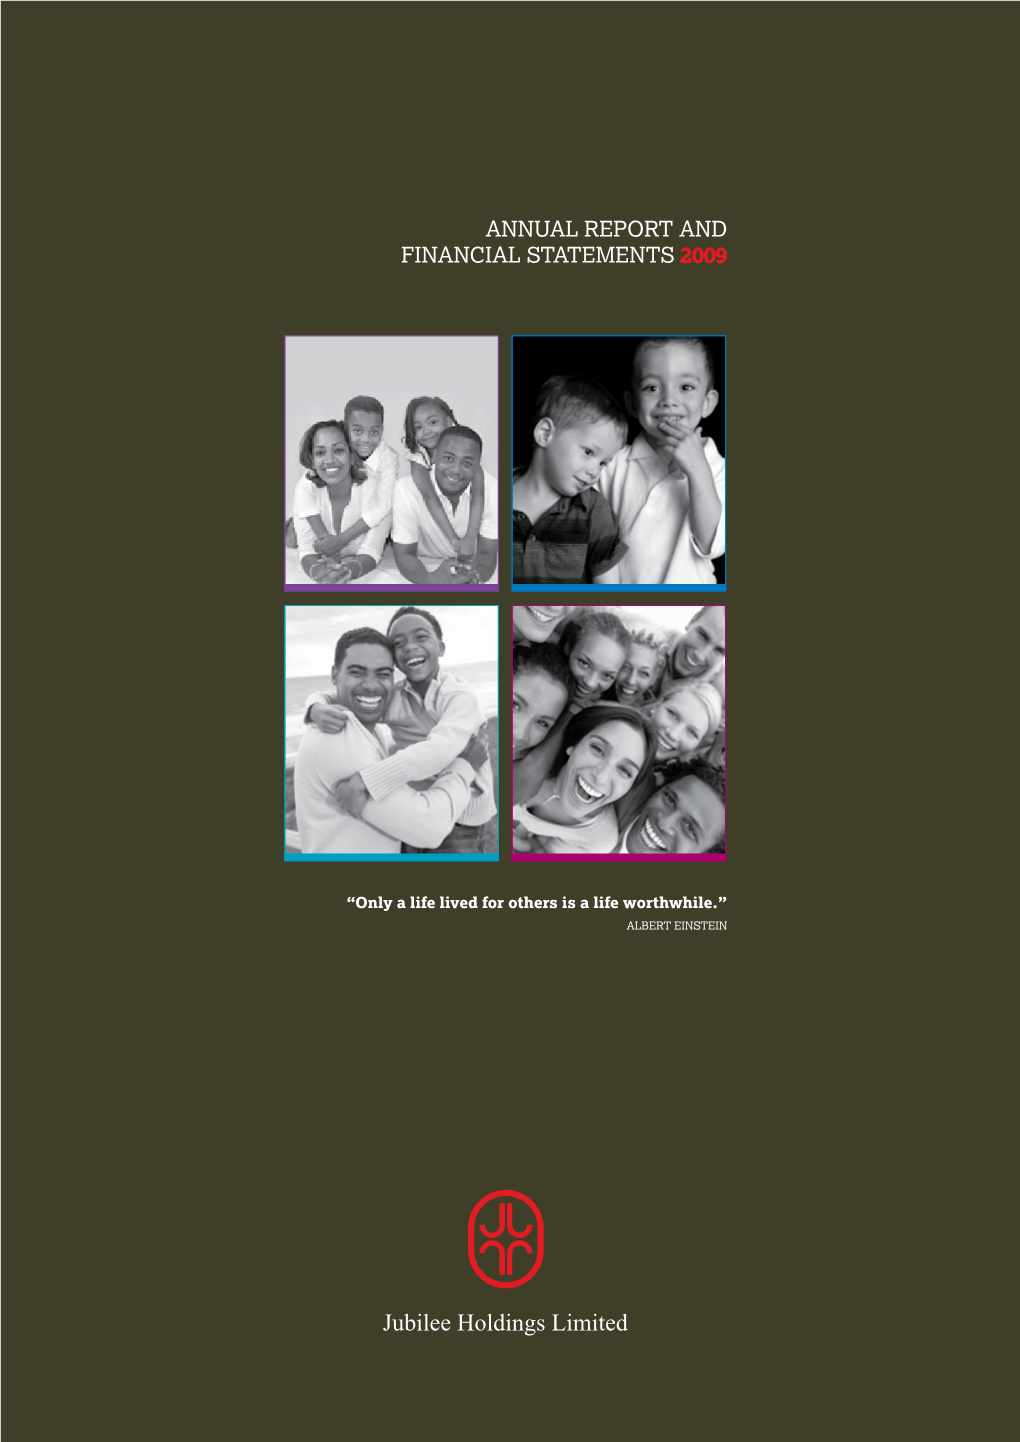 Jubilee Holdings Limited Annual Report 2009.Pdf